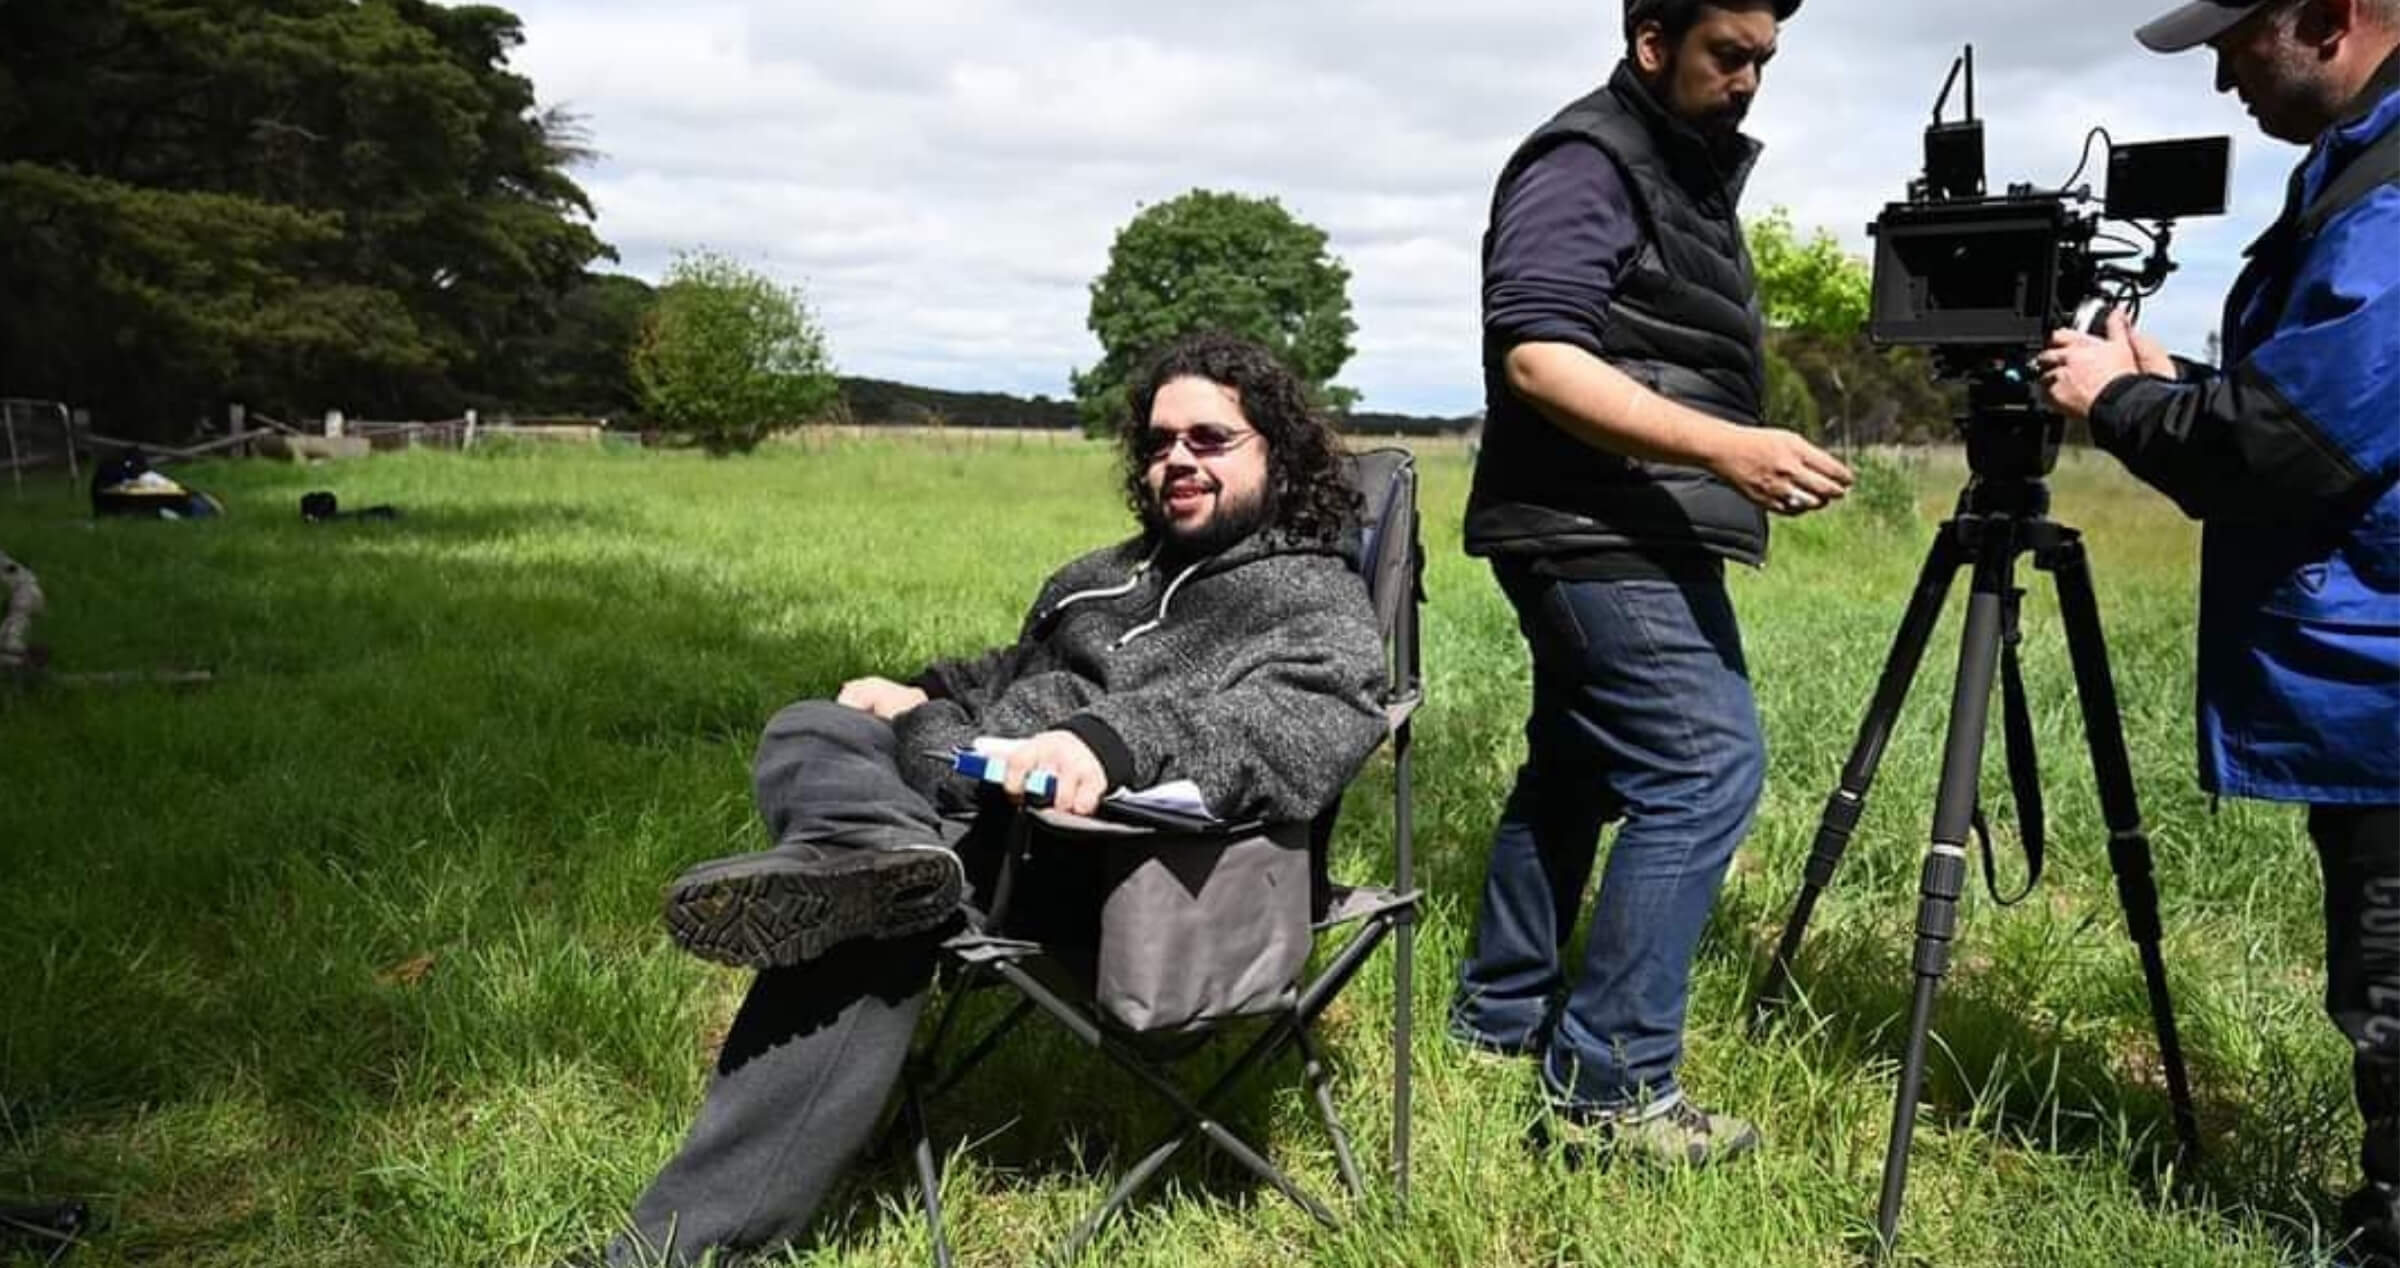 Image of young man sitting in director chair at an outdoor film set with crew members and cabers equipment in background